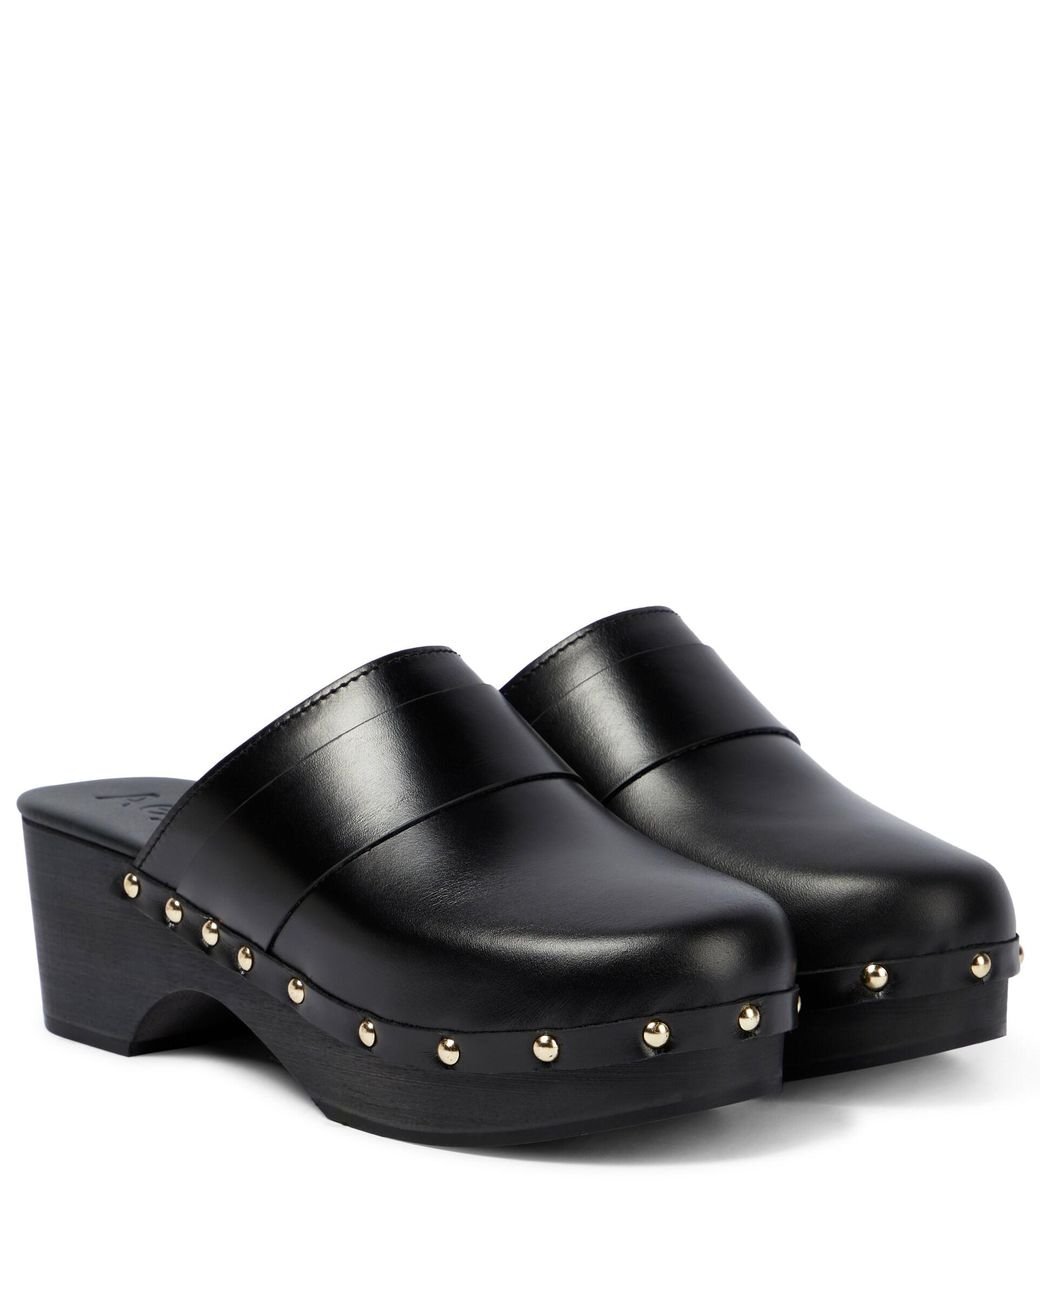 Aeyde Bibi Leather Clogs in Black | Lyst